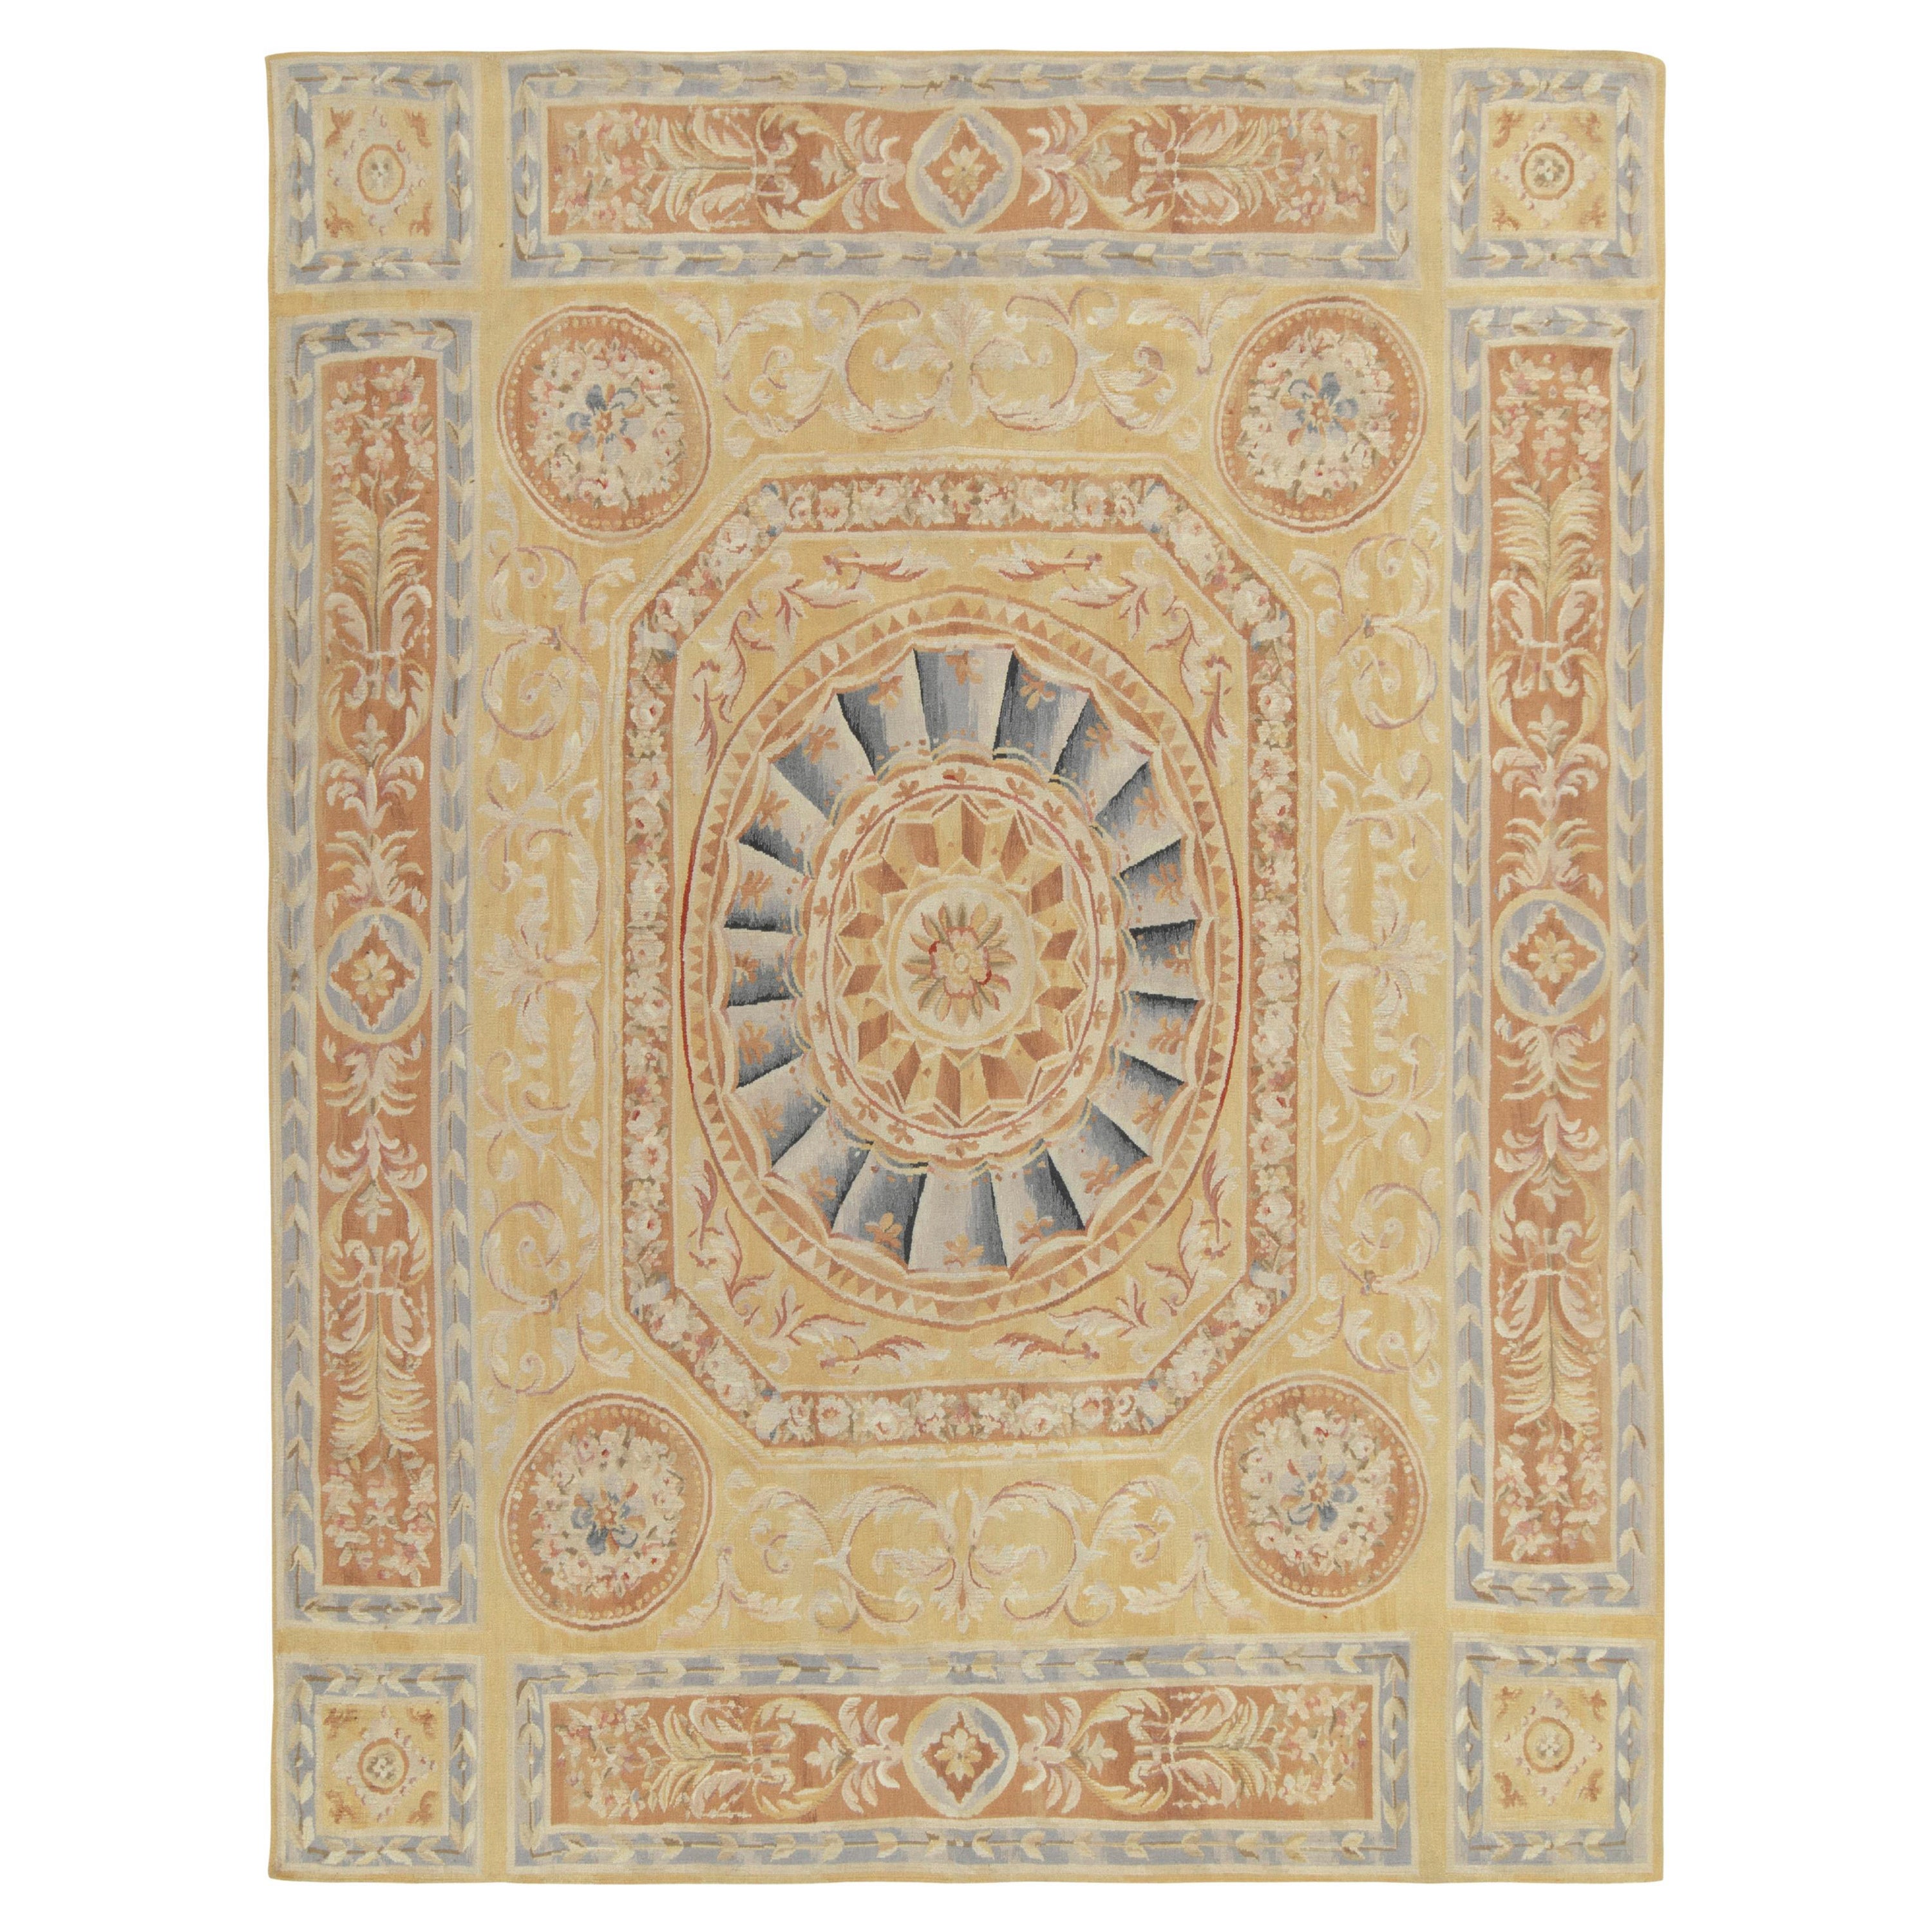 Rug & Kilim's Aubusson Style Flatweave Rug in Gold, Beige-Brown & Blue Florals